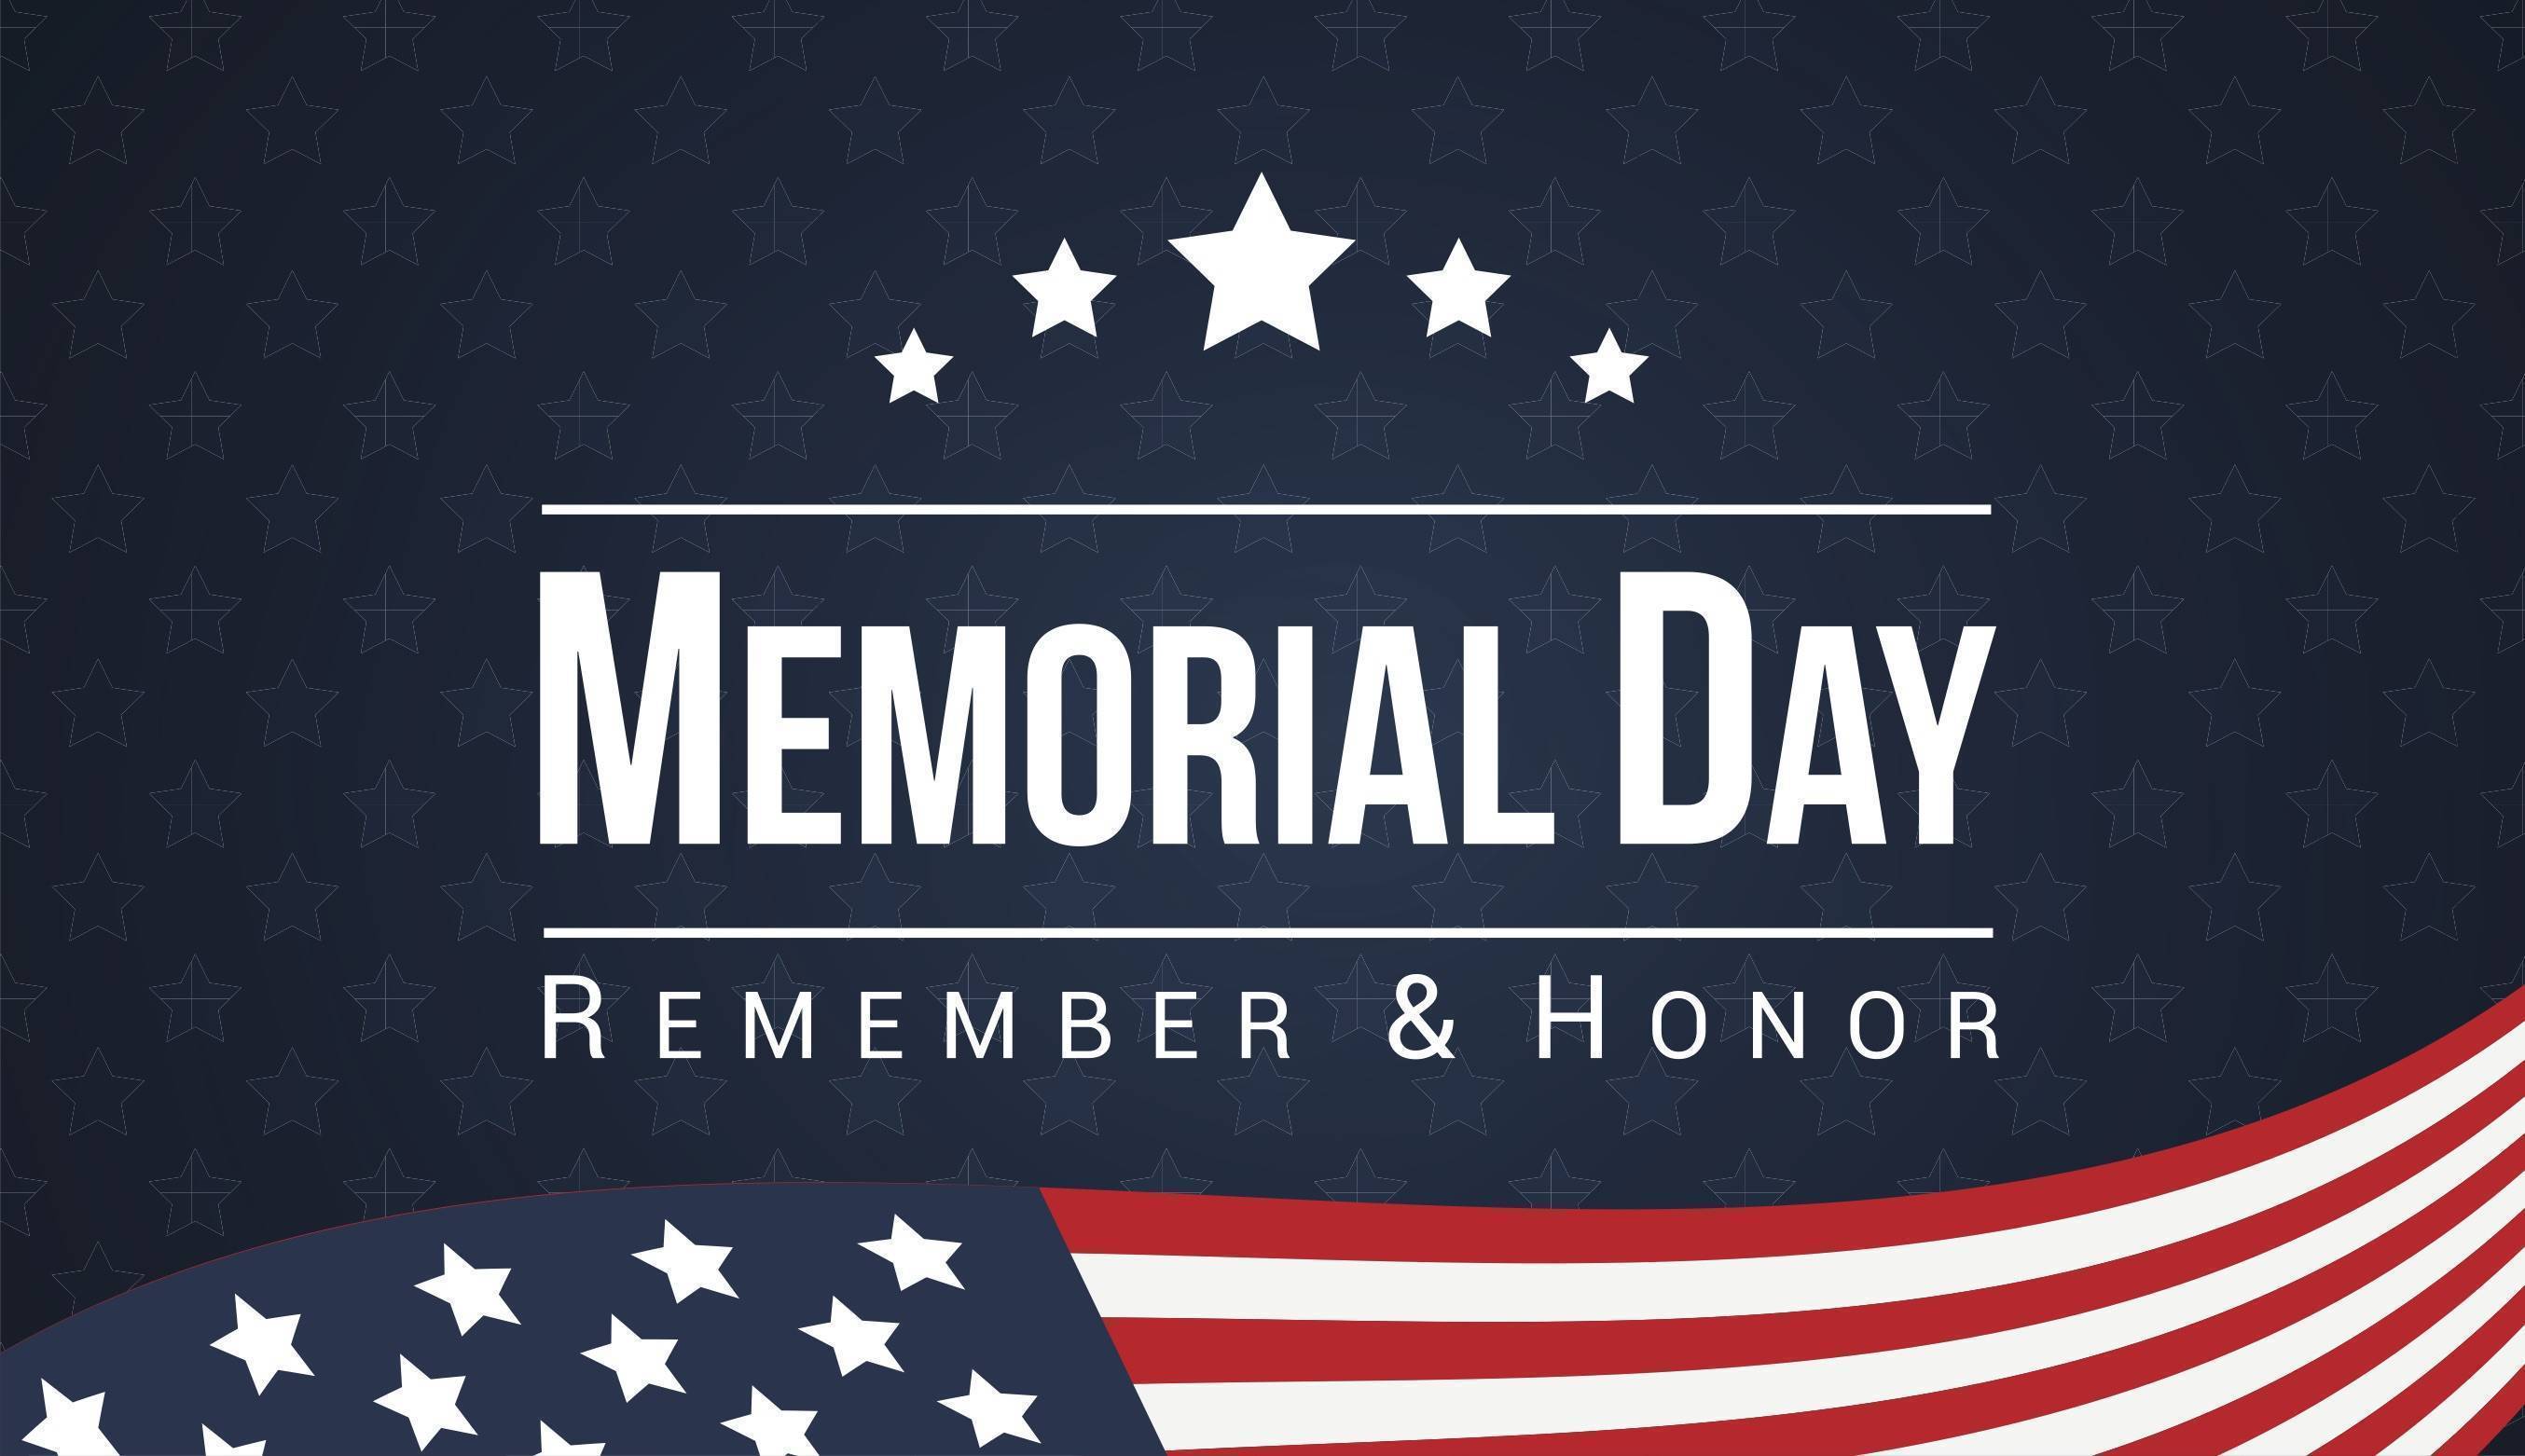 Memorial Day – a reminder